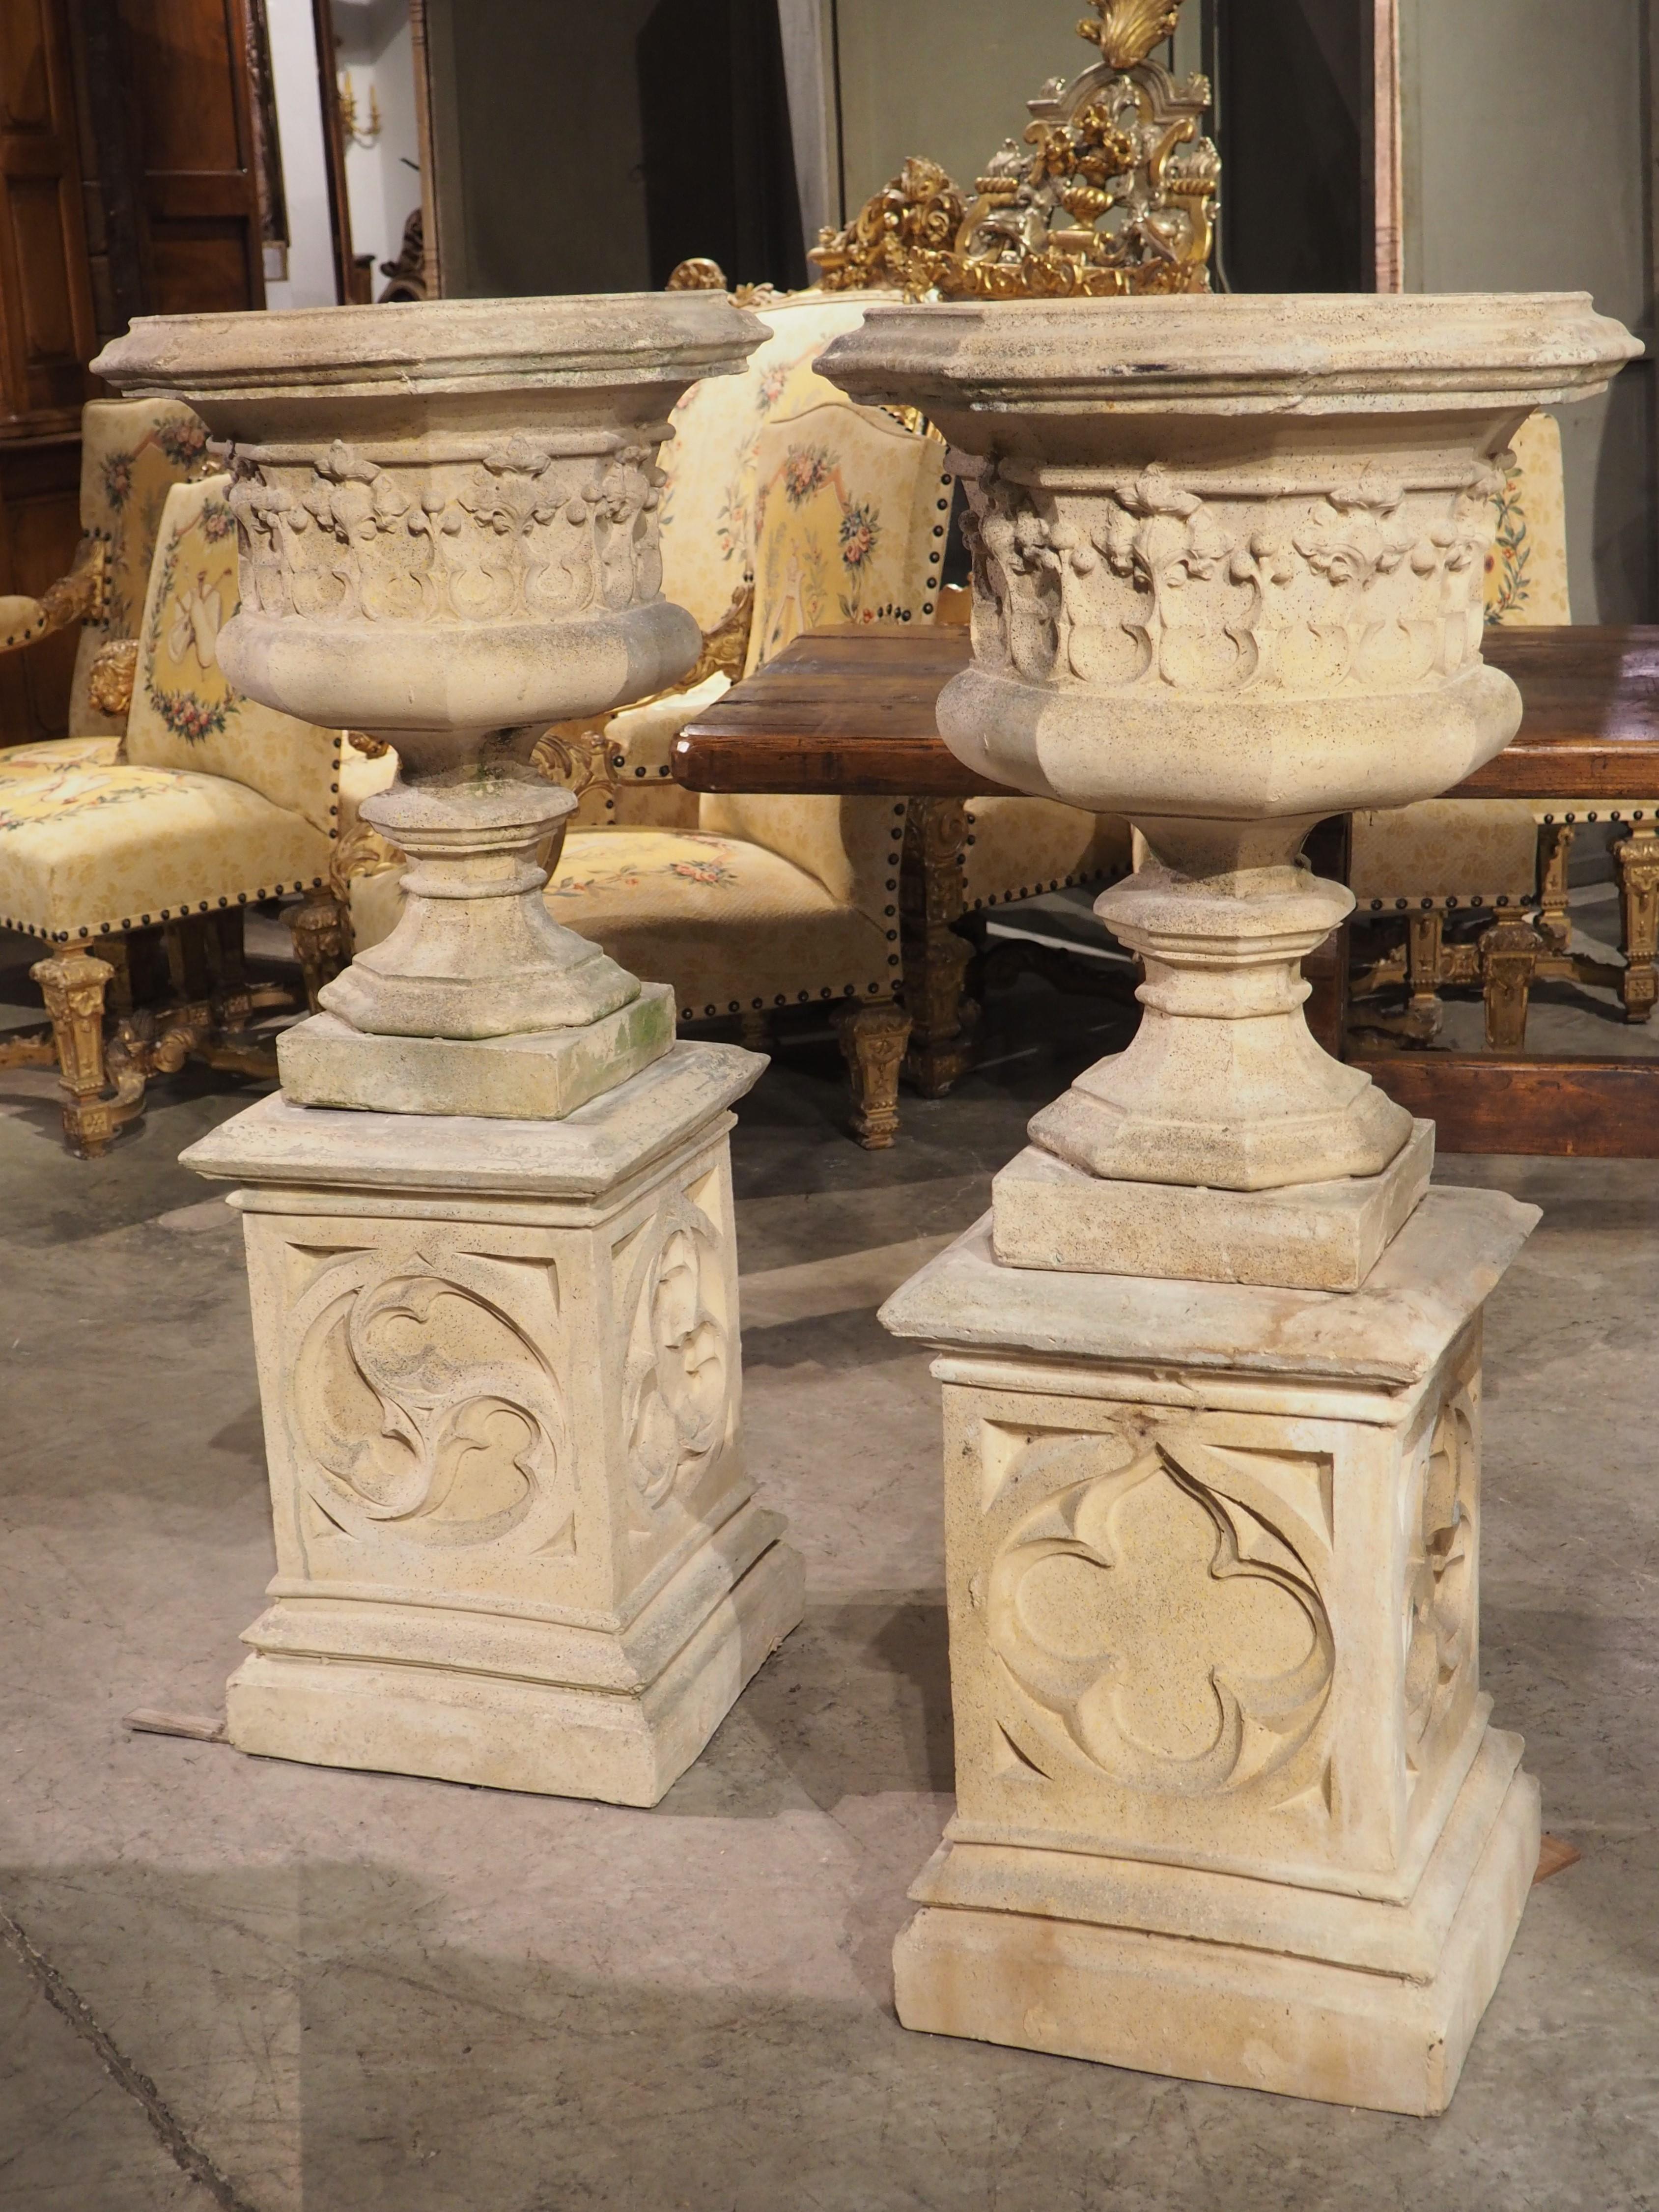 These cast French vases with matching pedestals have some exquisite Gothic motifs. Both octagonal vases have several layers of molding along the 17 inch opening. The main body is adorned with finely detailed foliate tracery set between two half